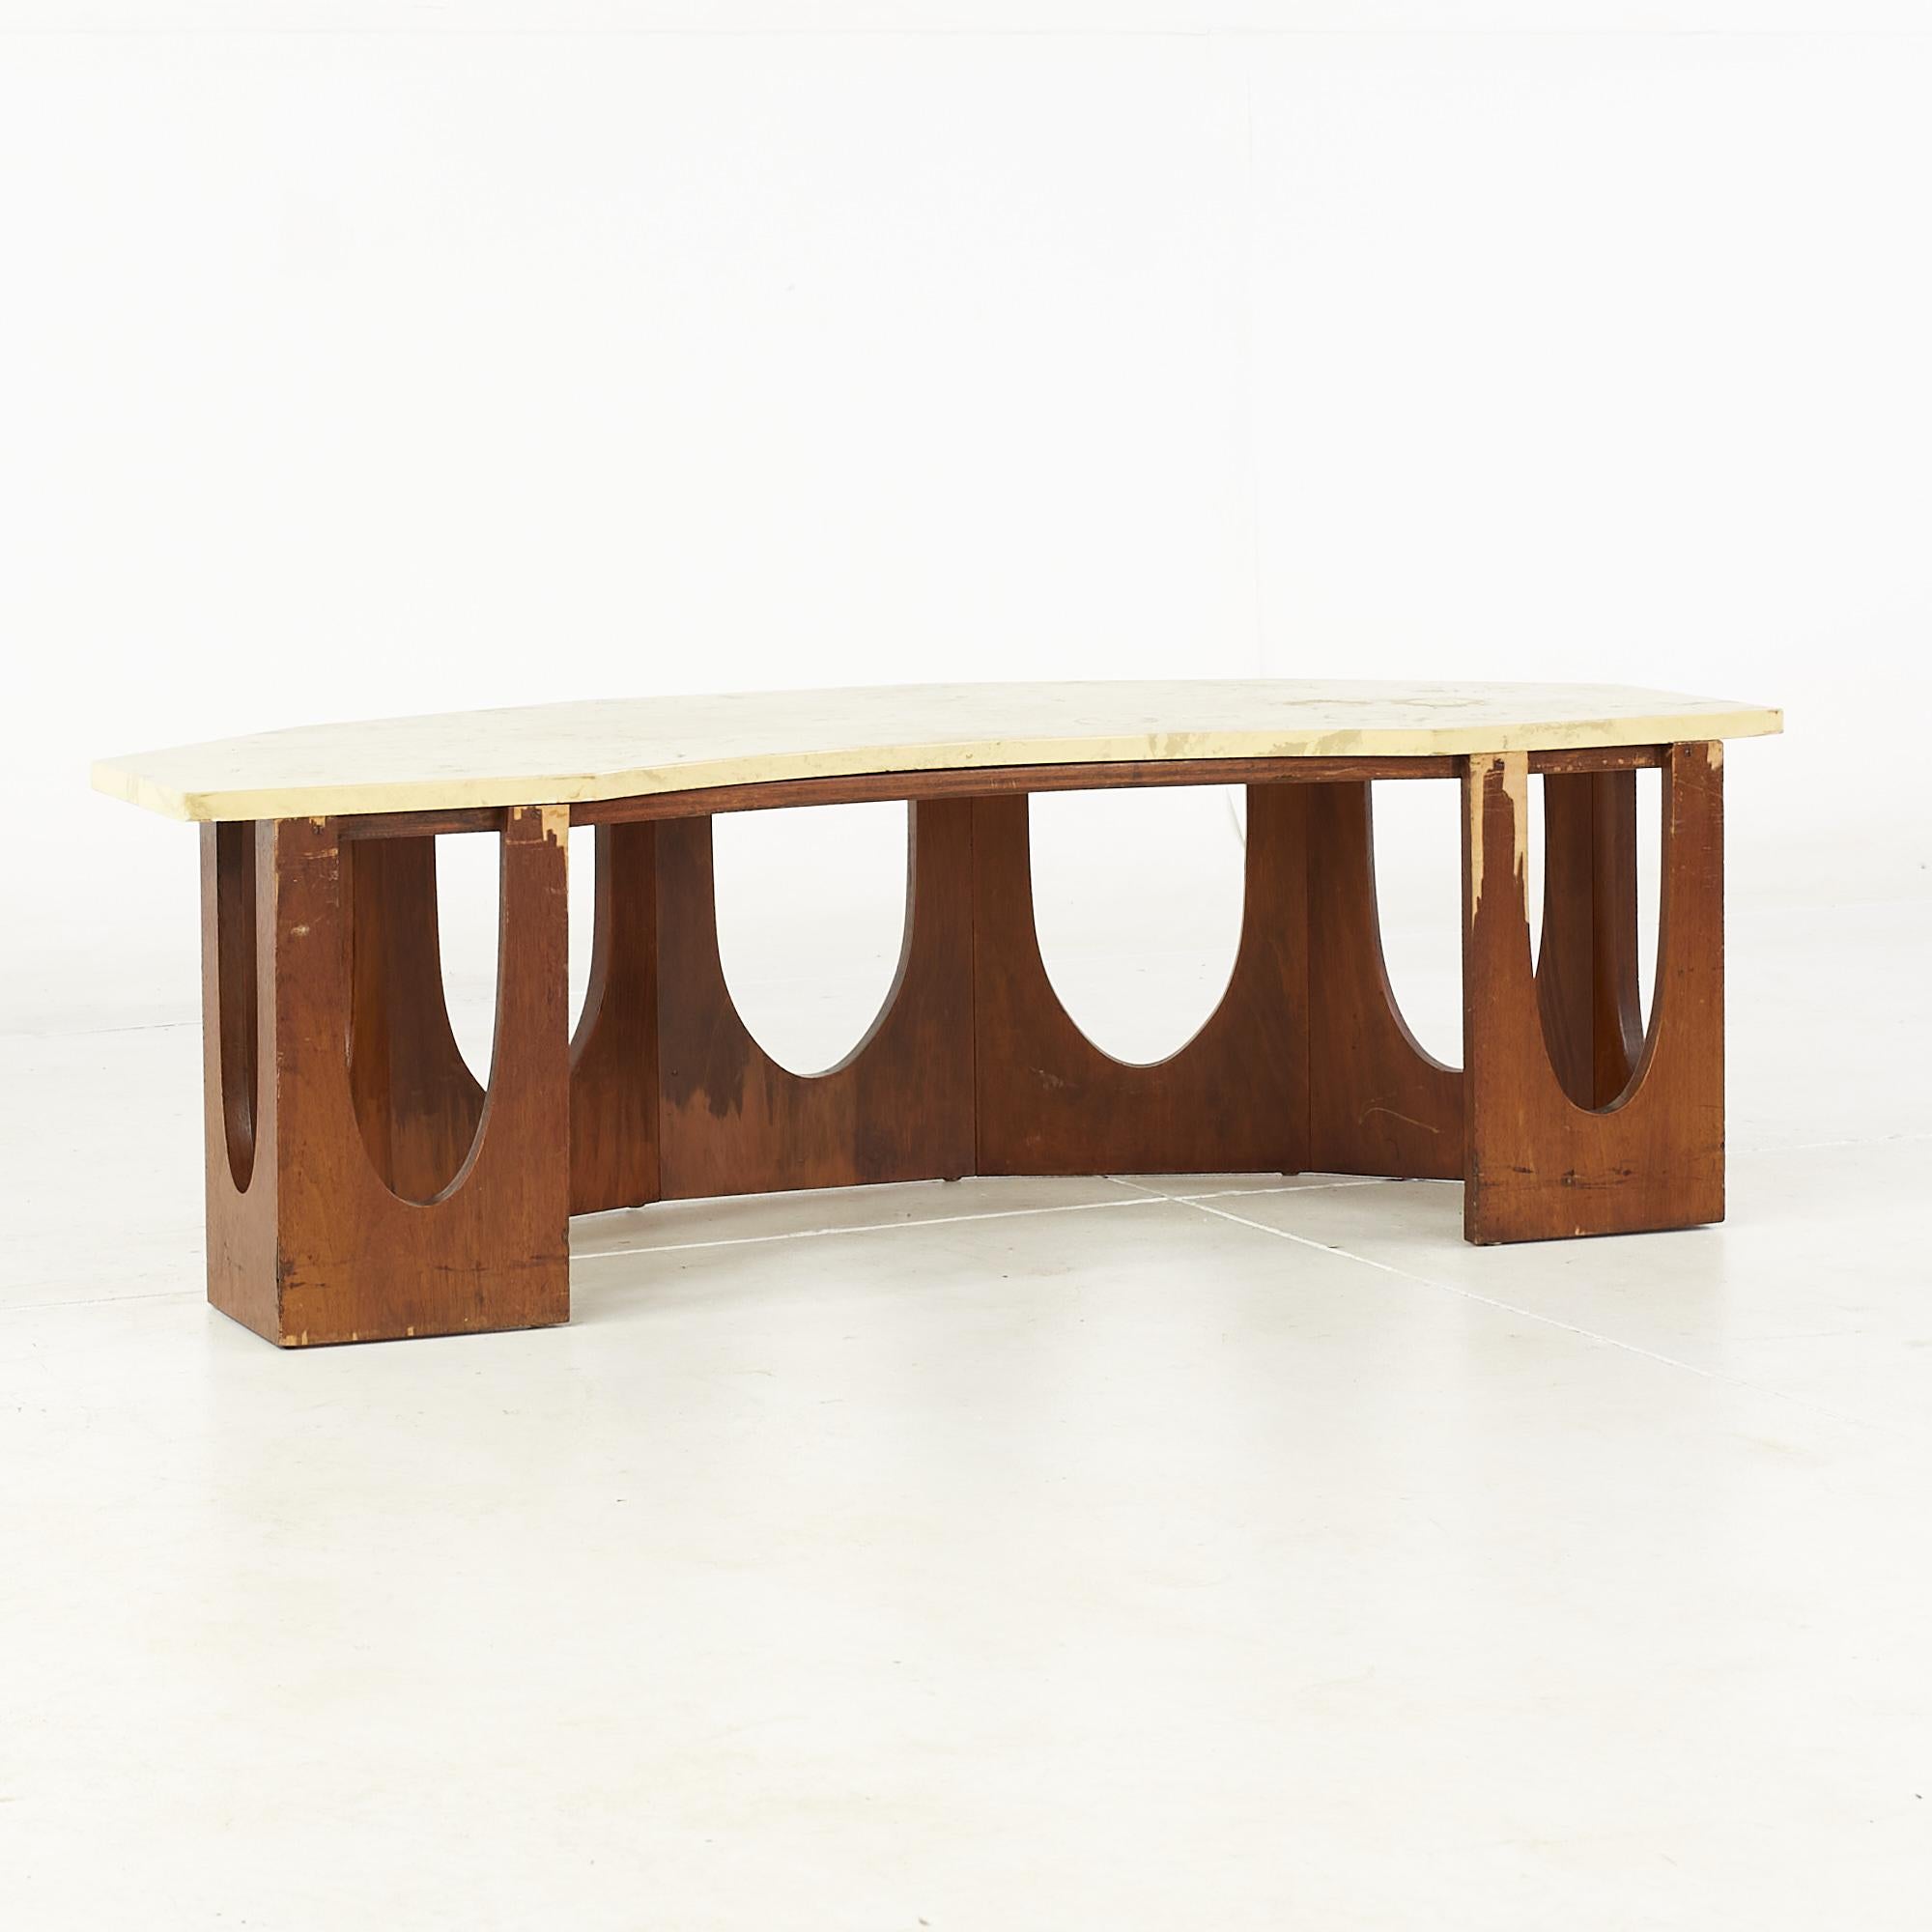 Late 20th Century Harvey Probber Mid Century Walnut and Travetine Half Crescent Moon Coffee Table For Sale